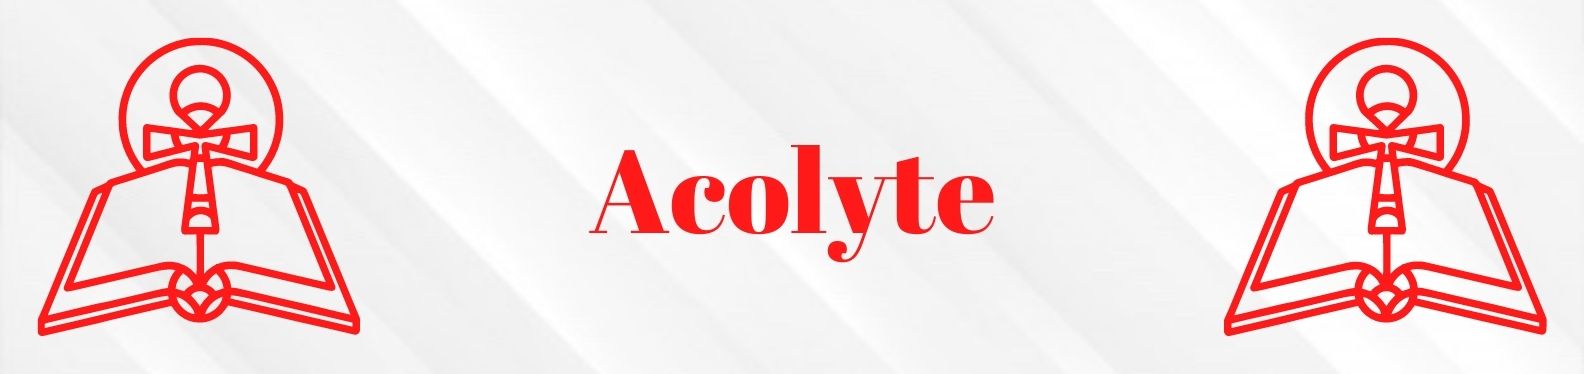 The word Acolyte written in red on a white background, with a bible and cross in red outline on each side of the word.